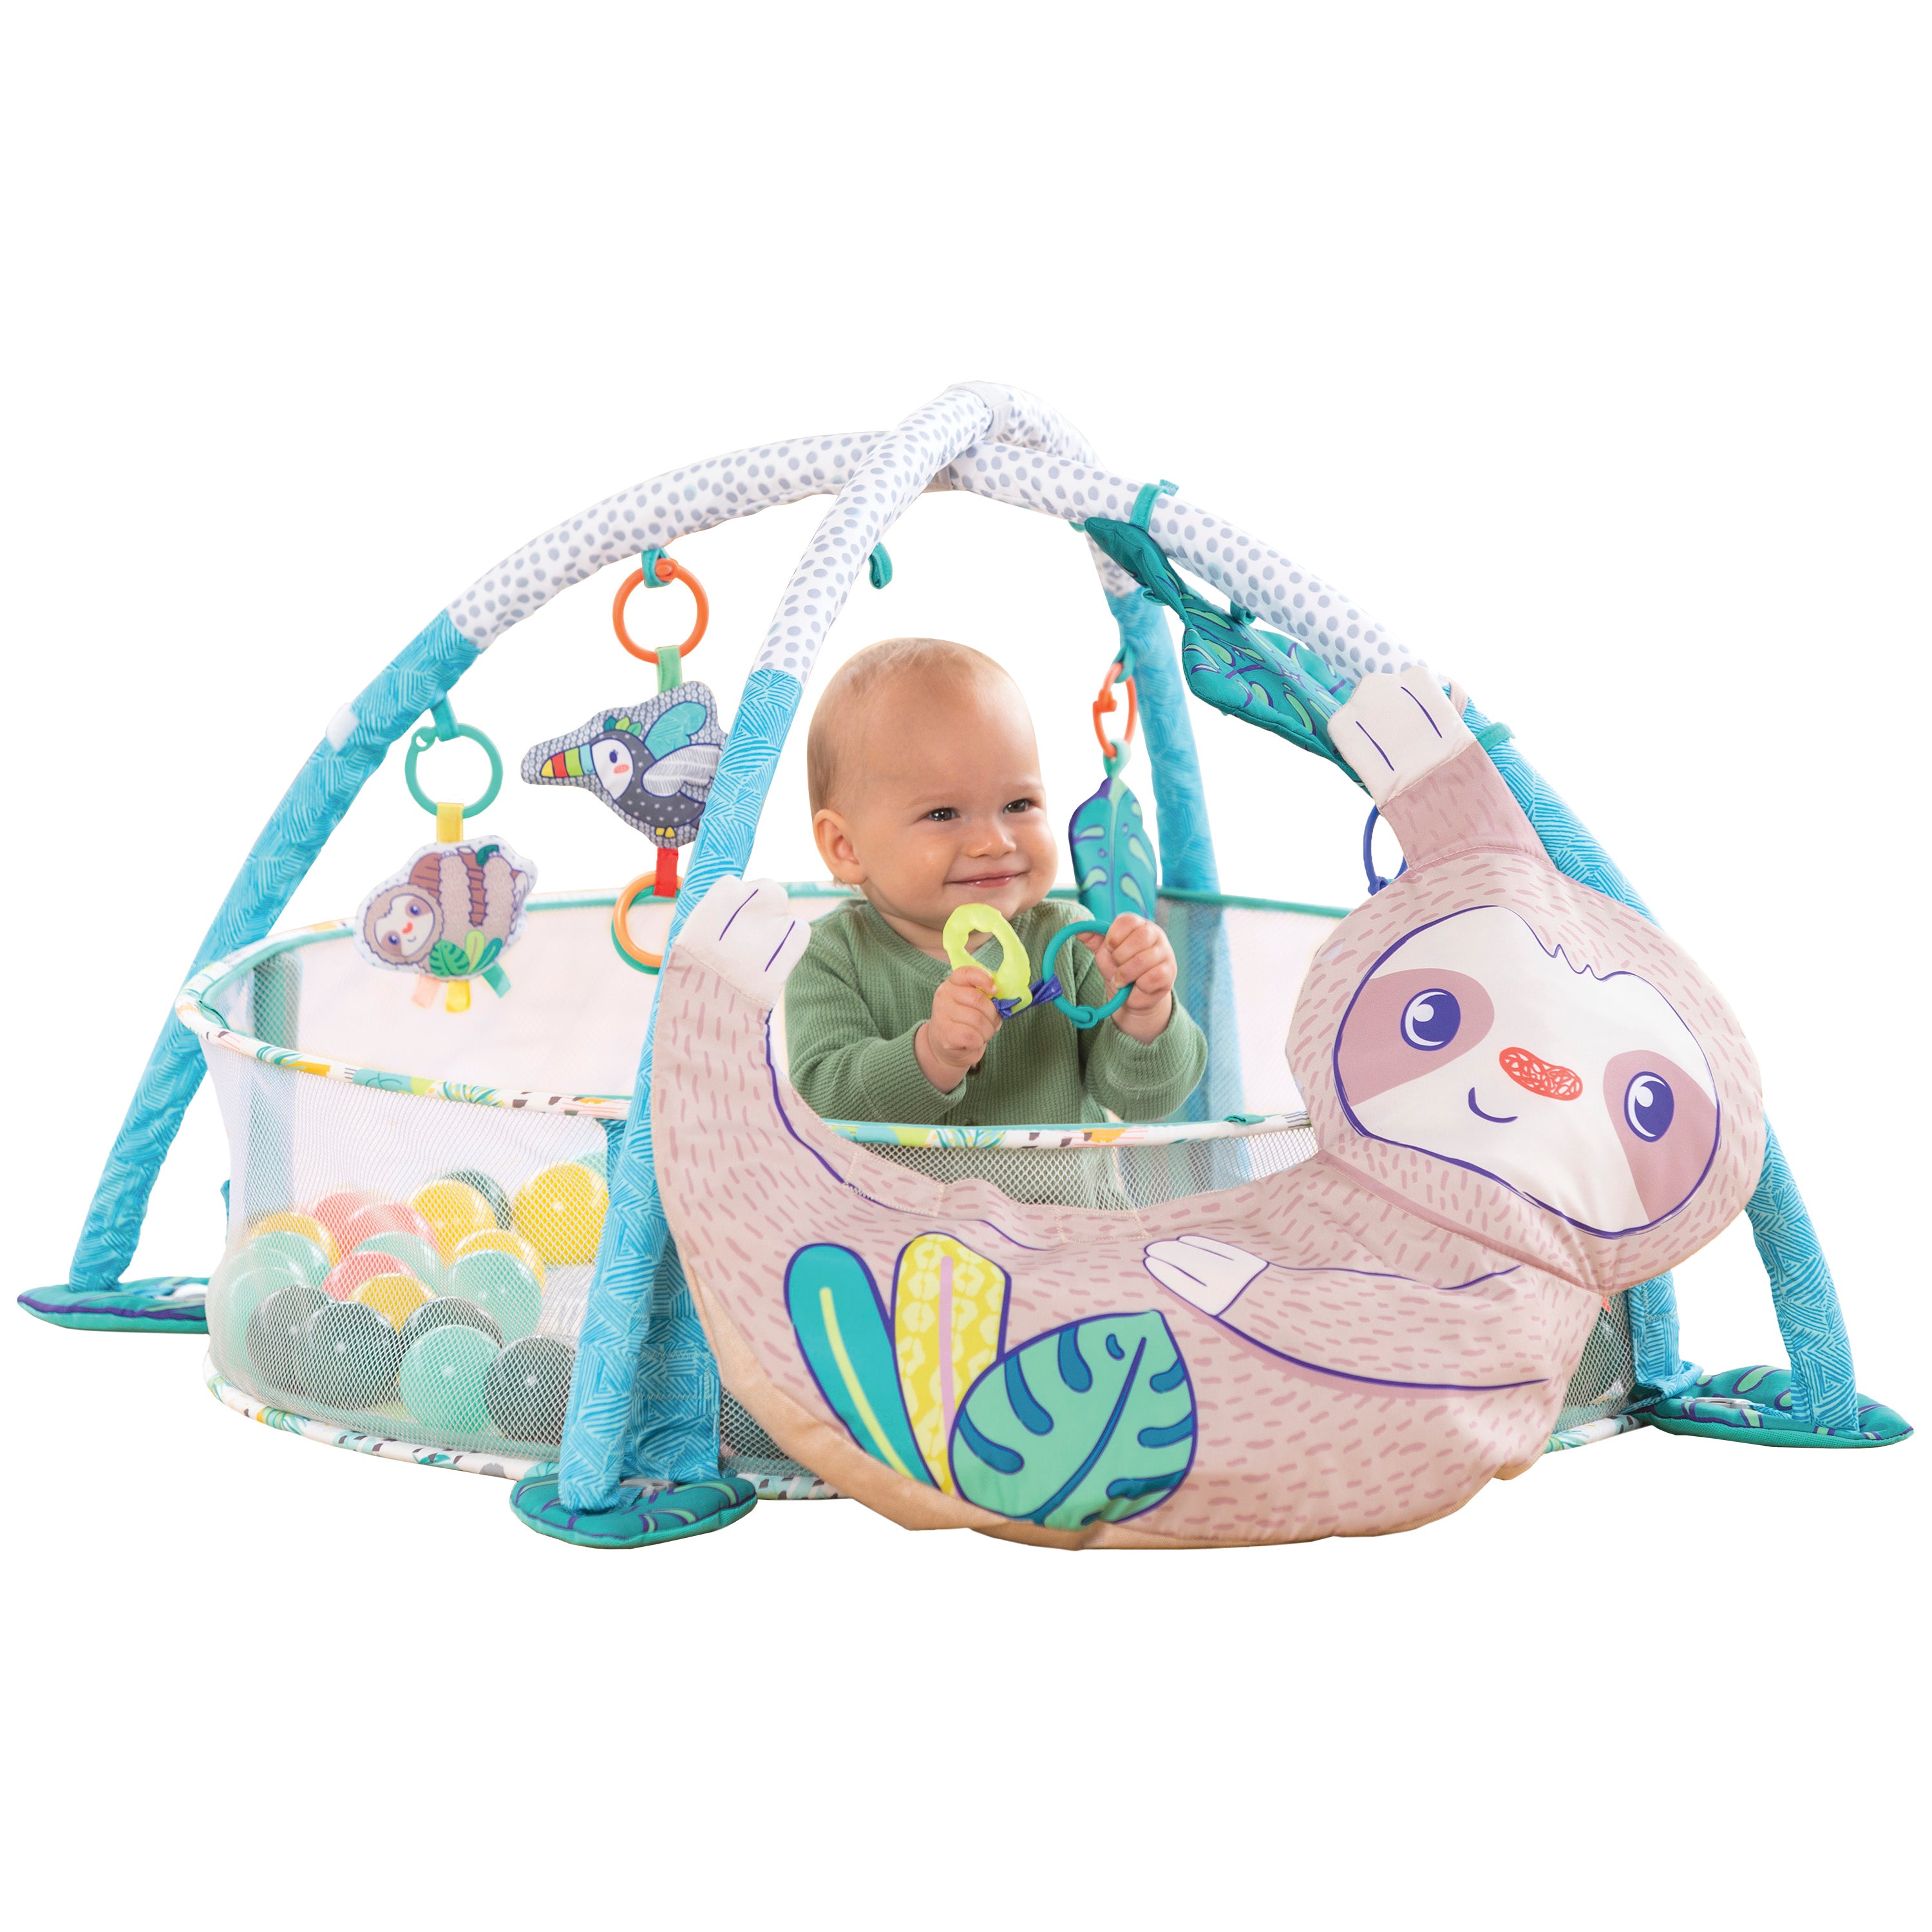 Activity Gym & Ball Pit 4-in-1 Jumbo Baby Cute Sloth Animal Design New Infantino-baby activity gym-AULEY